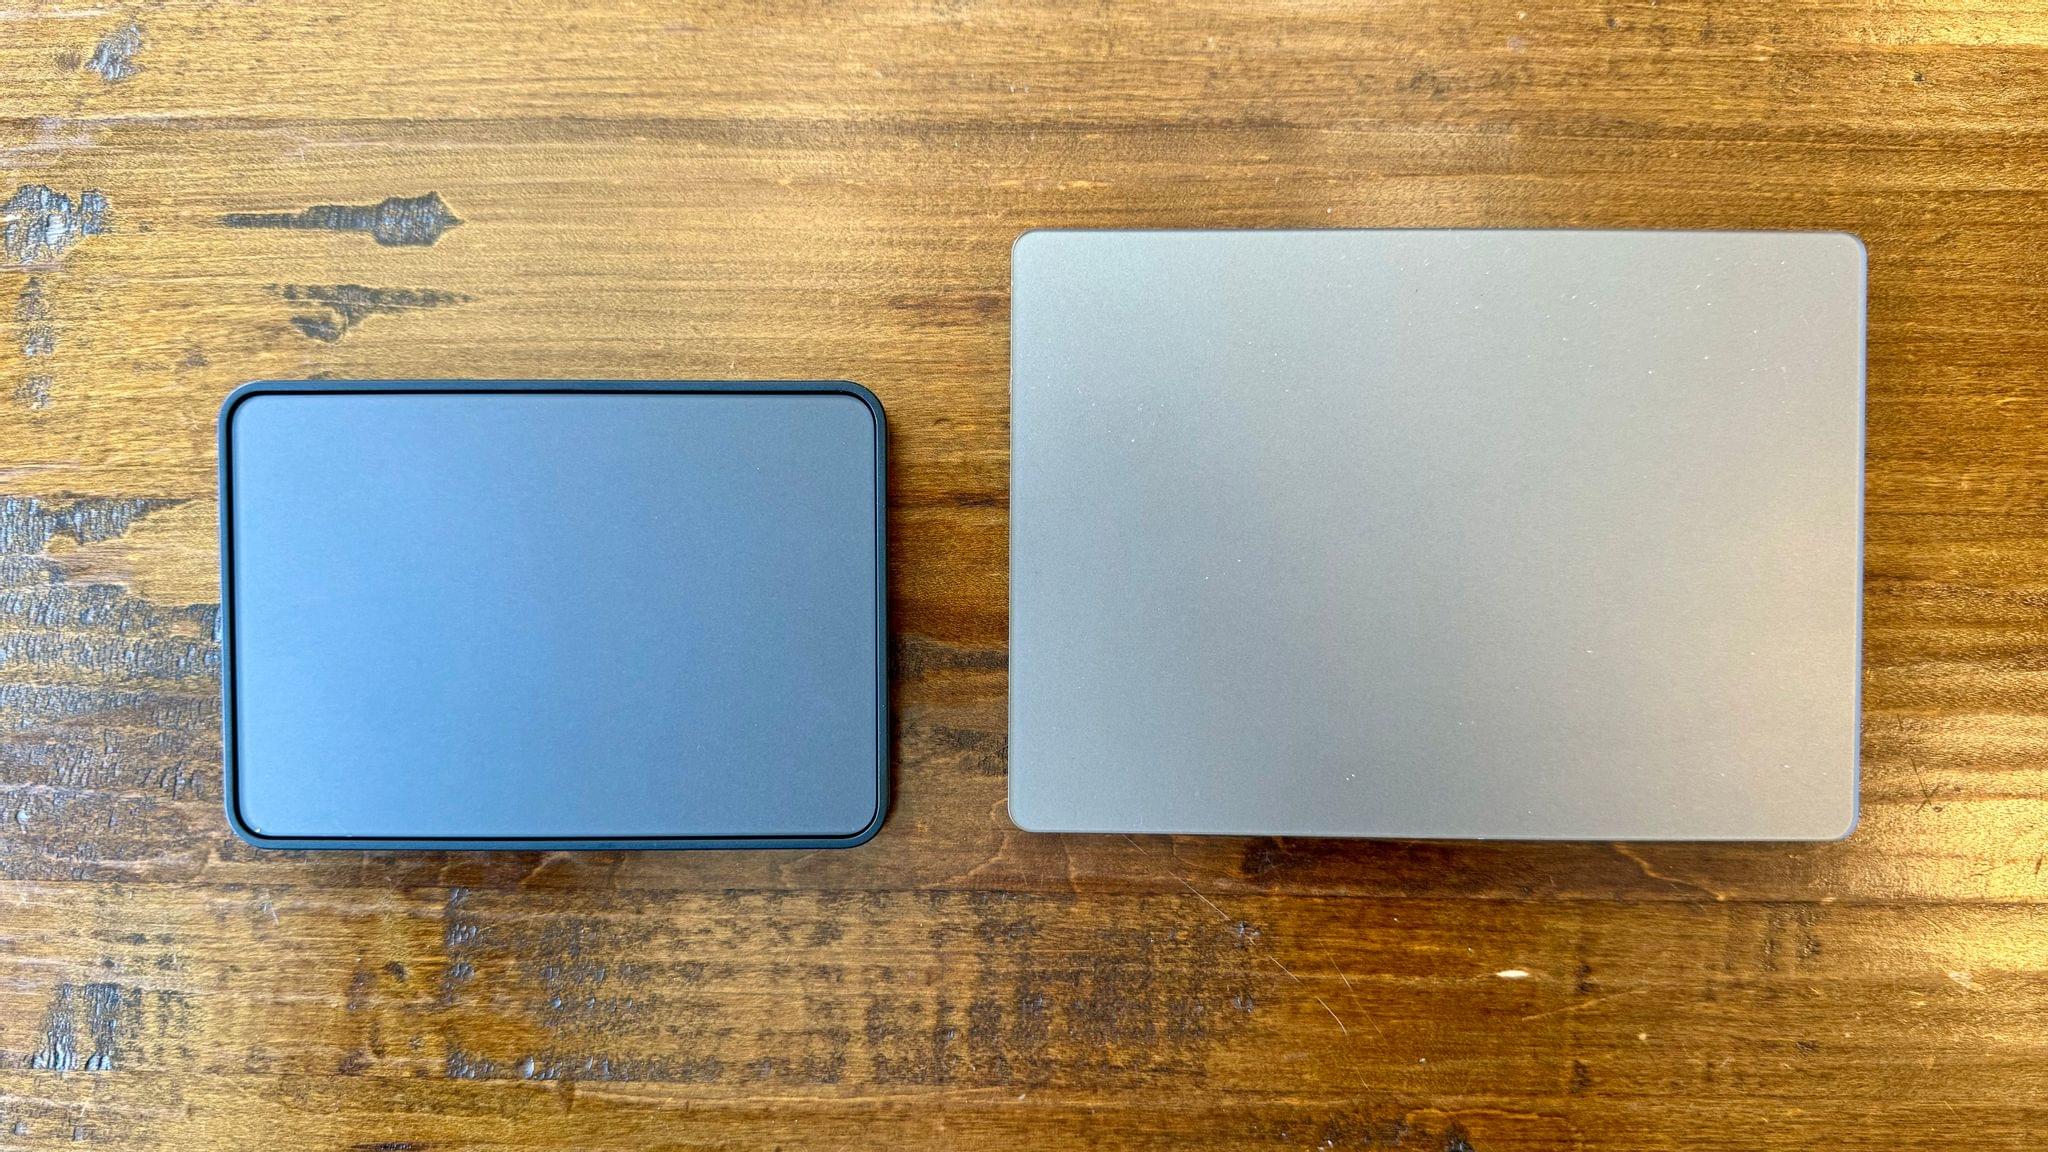 The Casa Touch (left) and Apple's Magic Trackpad (right).